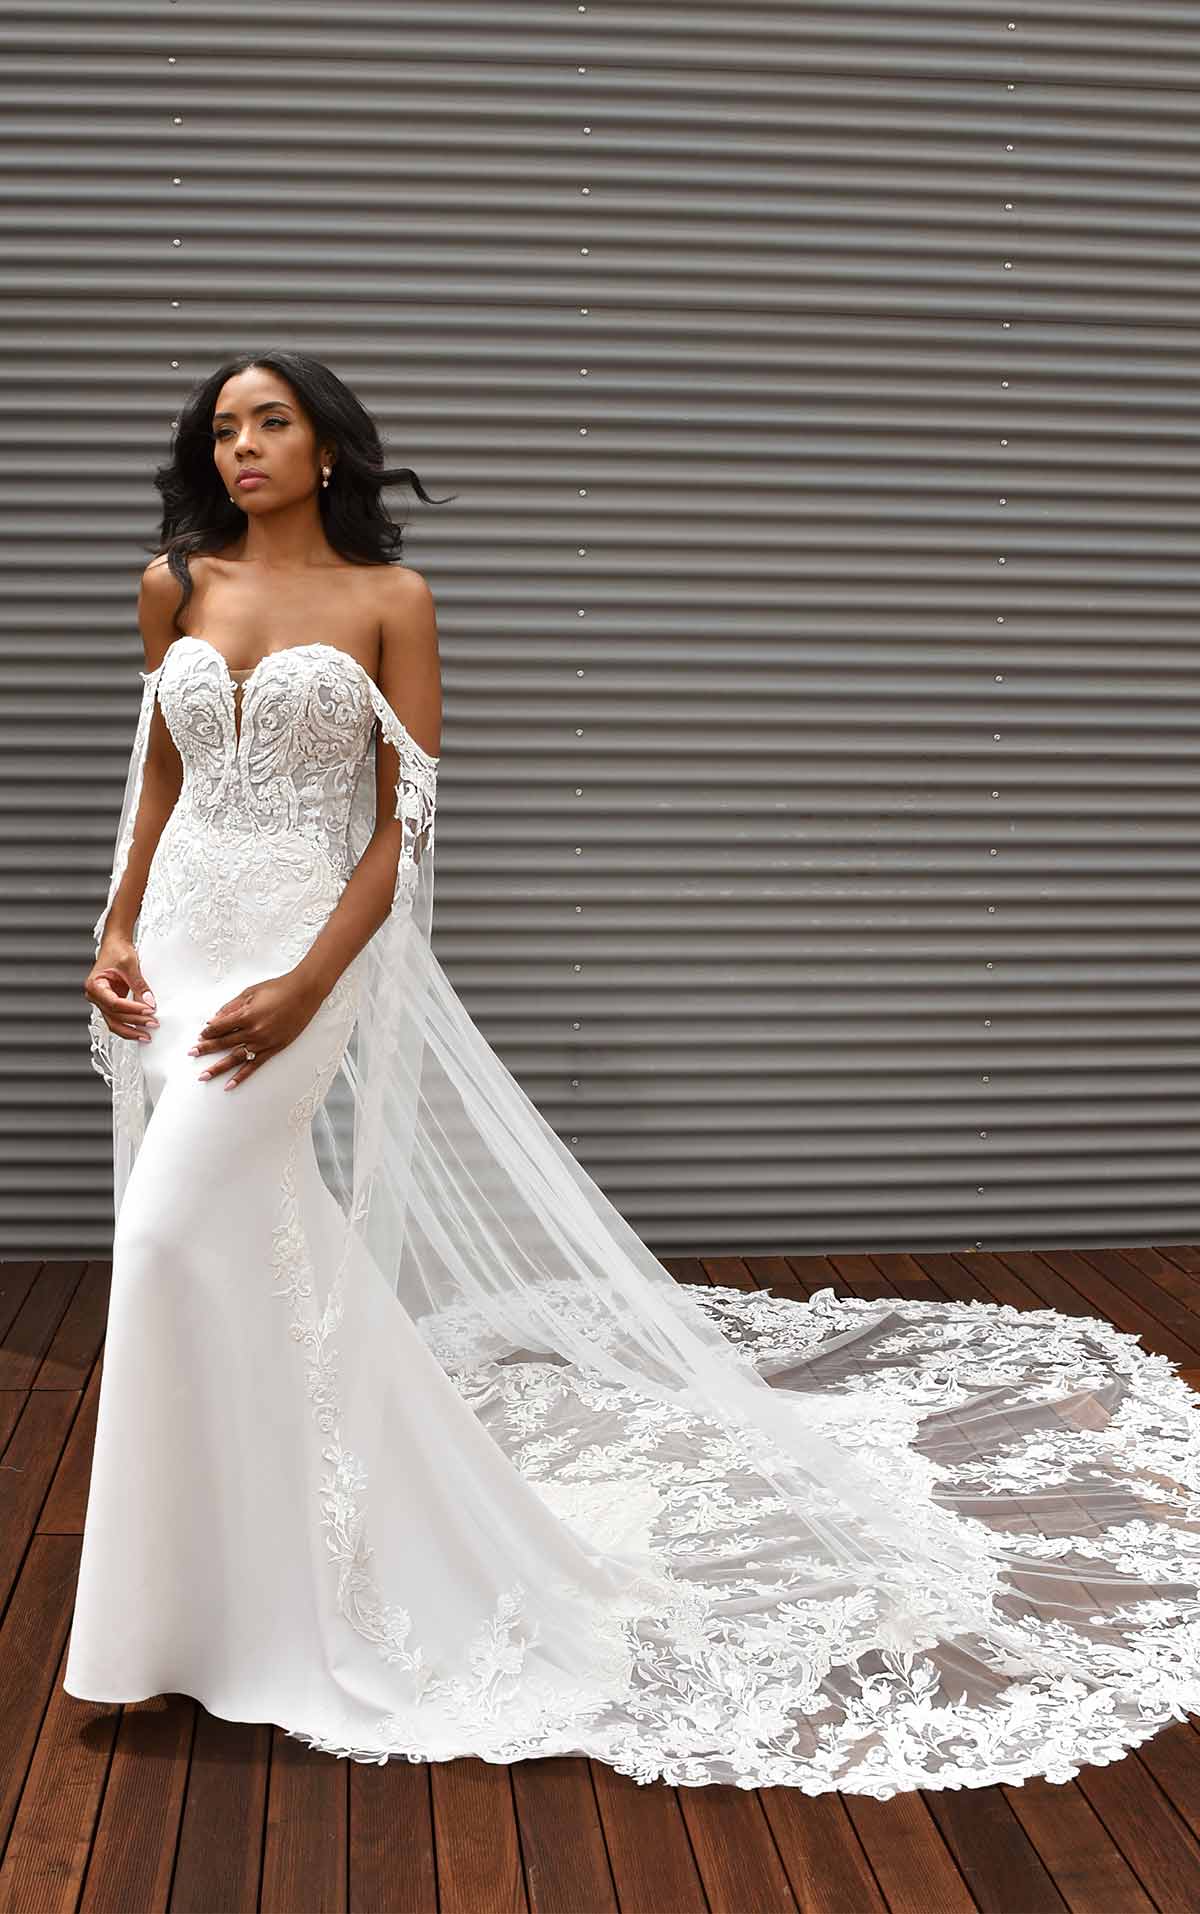 Vintage Lace Wedding Dresses for a Timeless Bridal Look